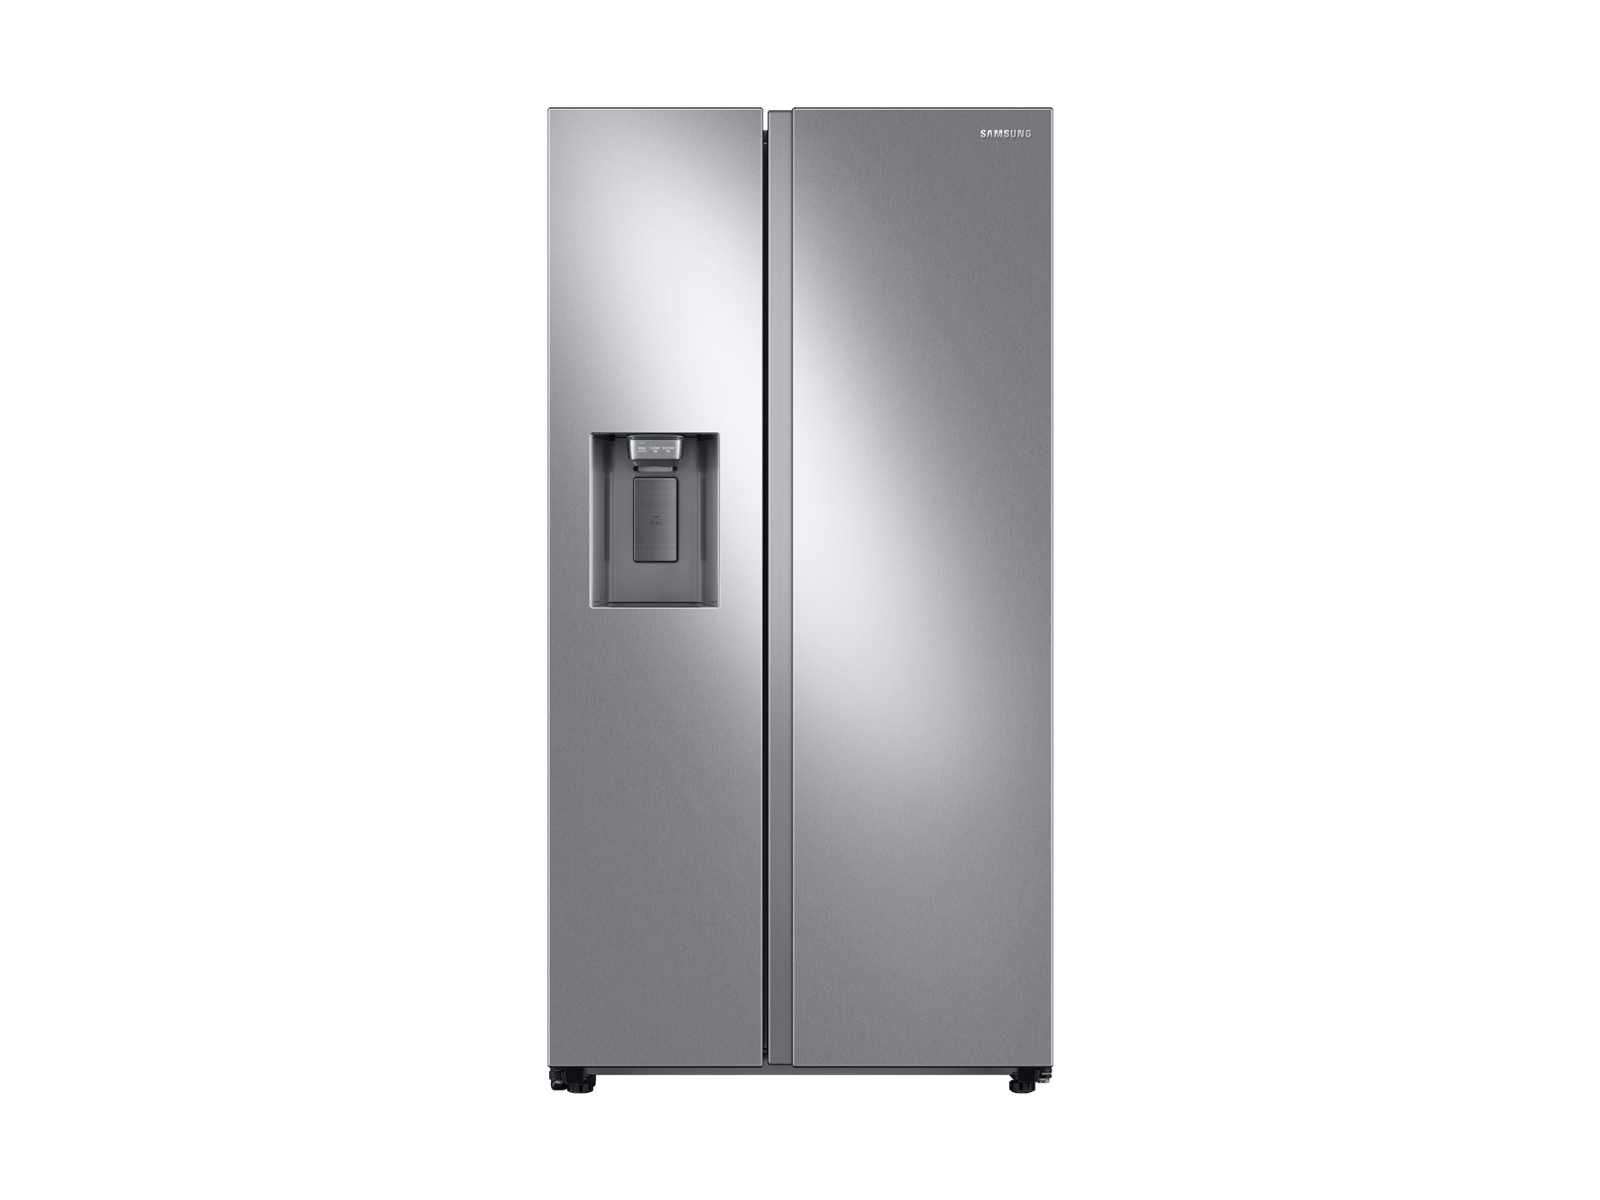 Samsung 22 cu. ft. Counter Depth Side-by-Side Refrigerator in Silver(RS22T5201SR/AA)